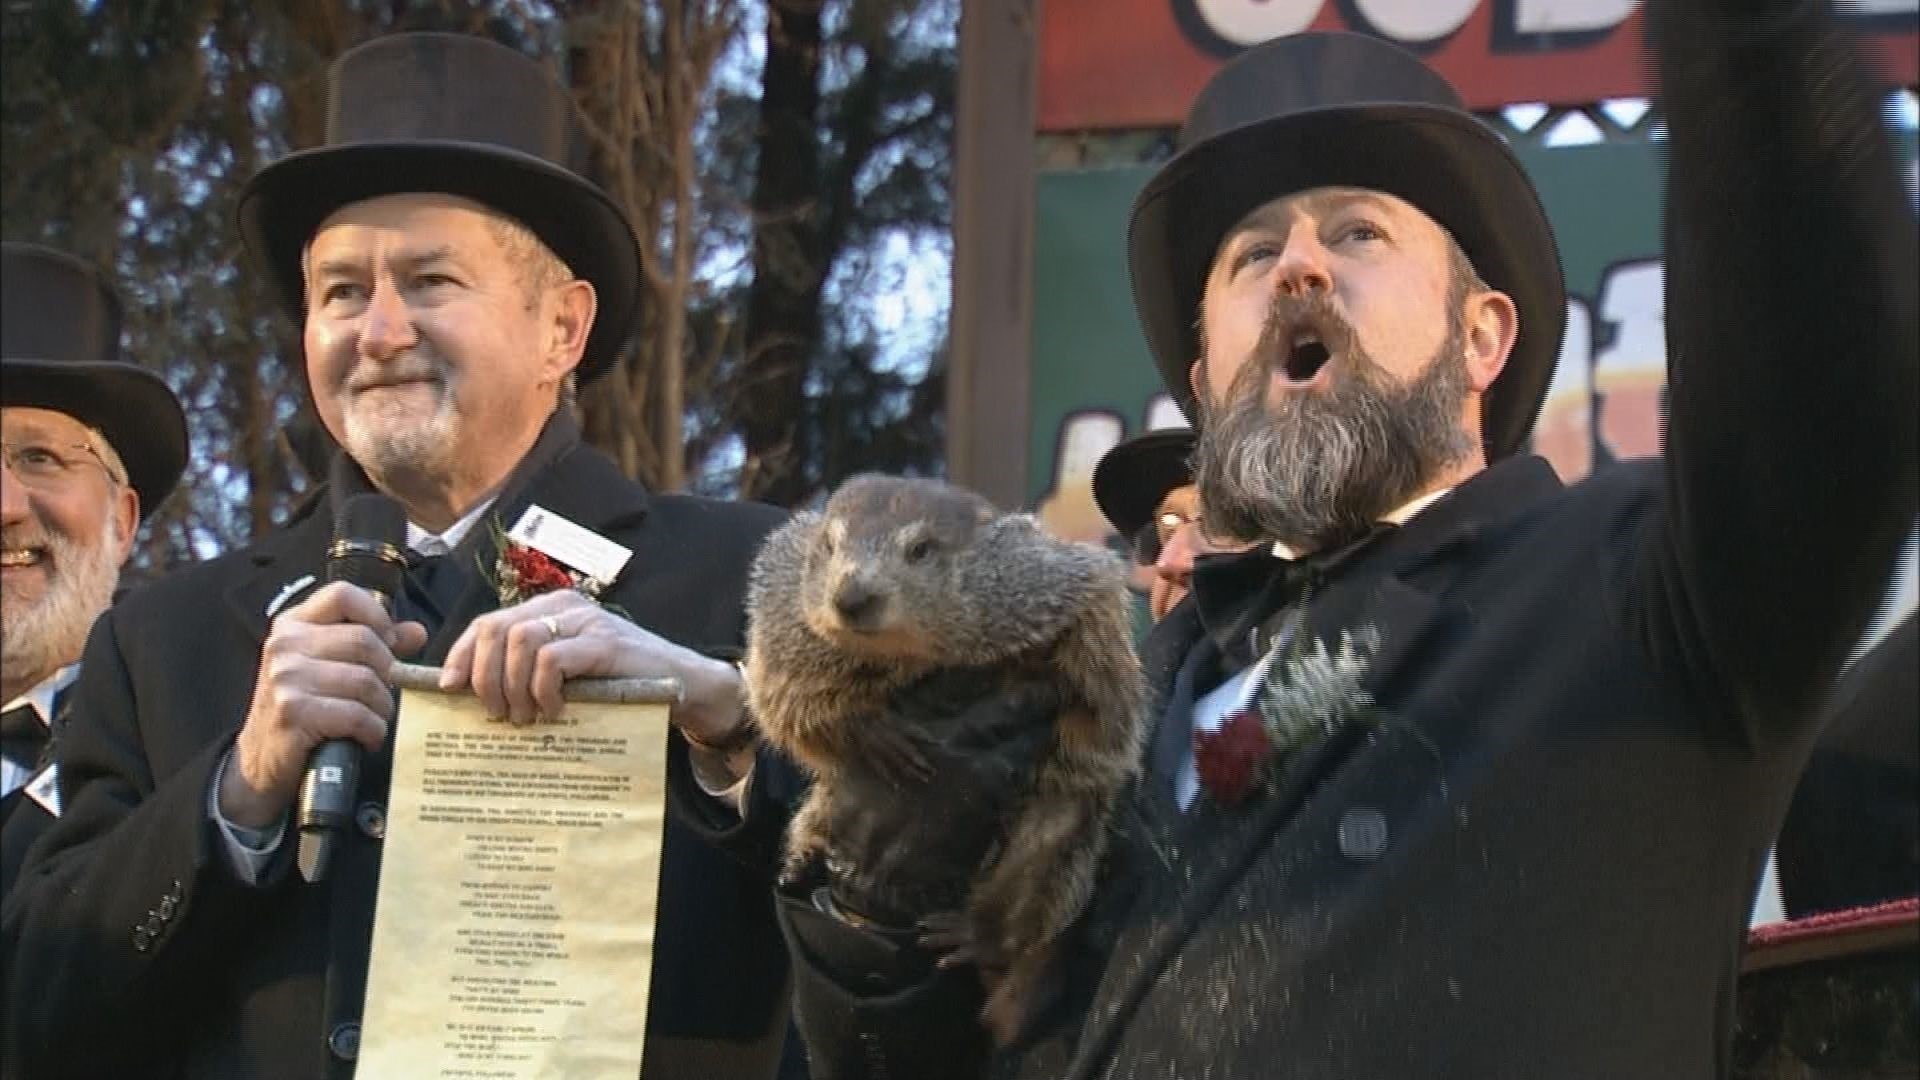 Handlers for Pennsylvania's most famous prognosticating groundhog say he didn't see his shadow when the sun rose Saturday.